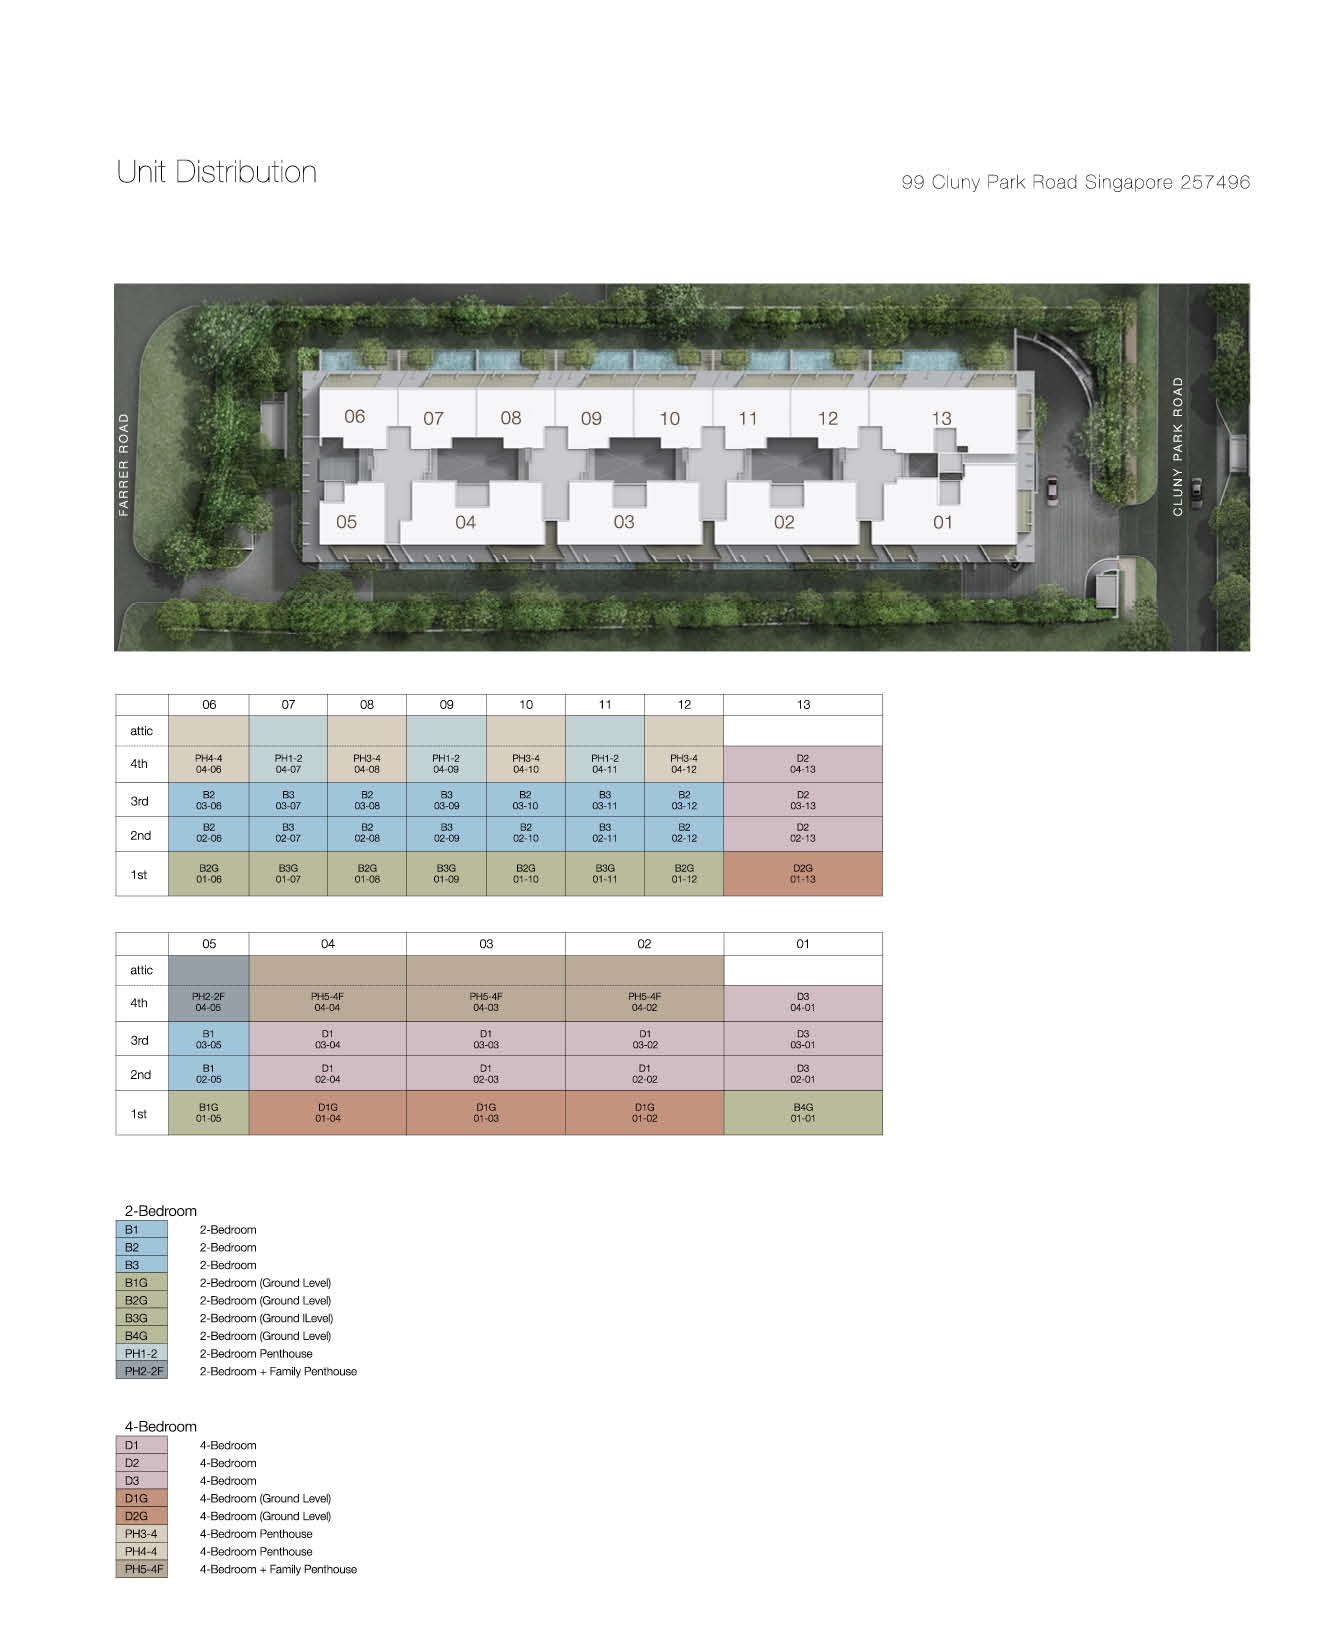 Cluny Park Residence Diagrammatic Chart